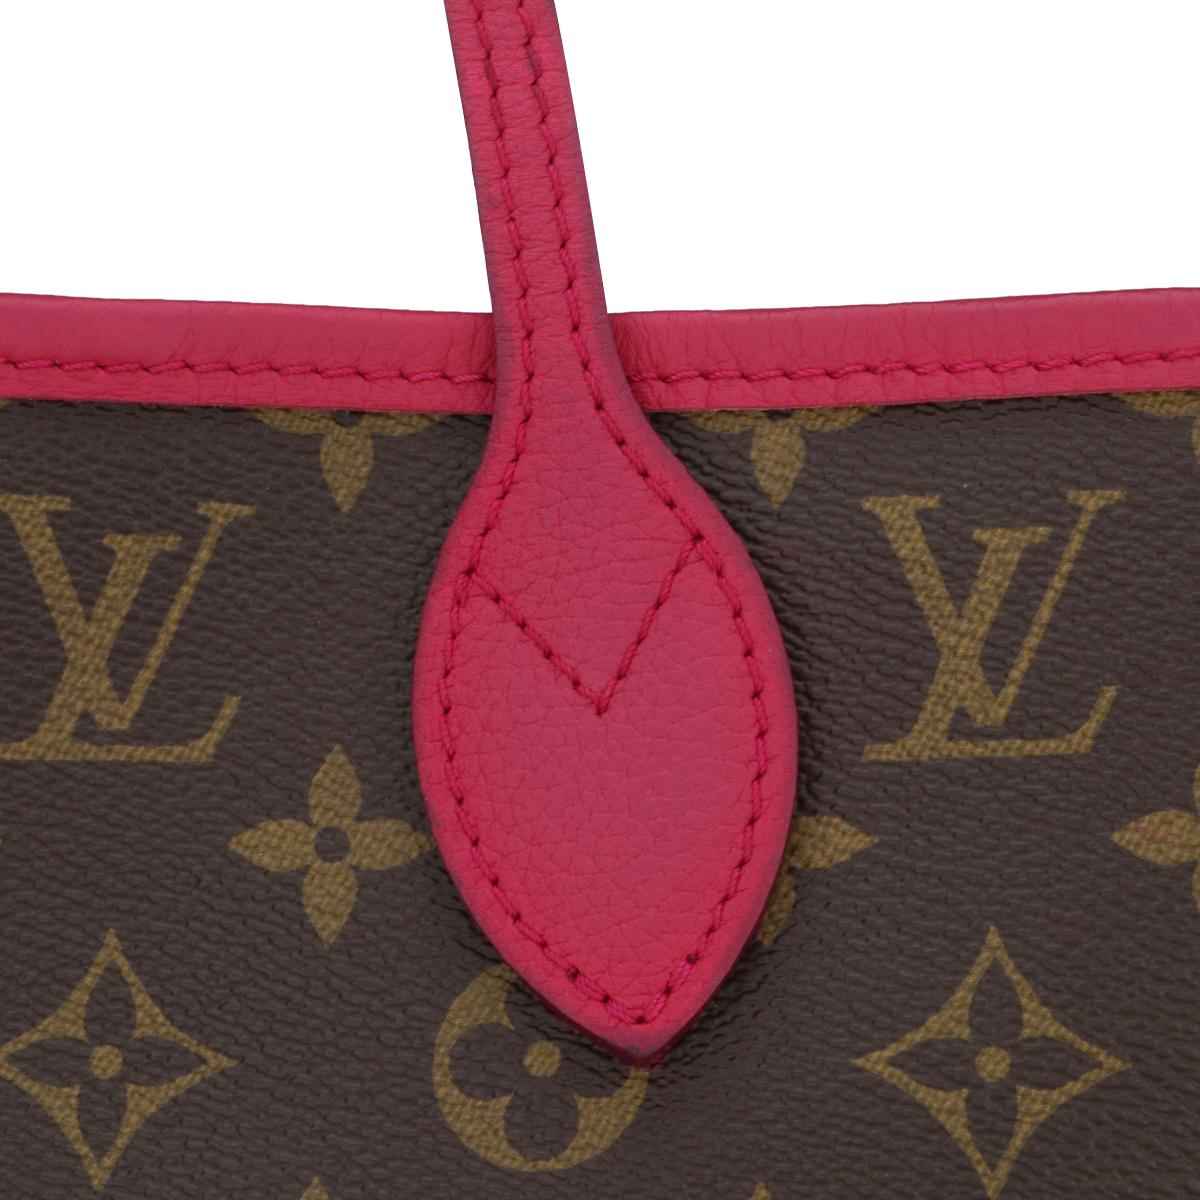 Louis Vuitton Neverfull MM Ikat Bag in Monogram Fuchsia 2013 Limited Edition For Sale 10